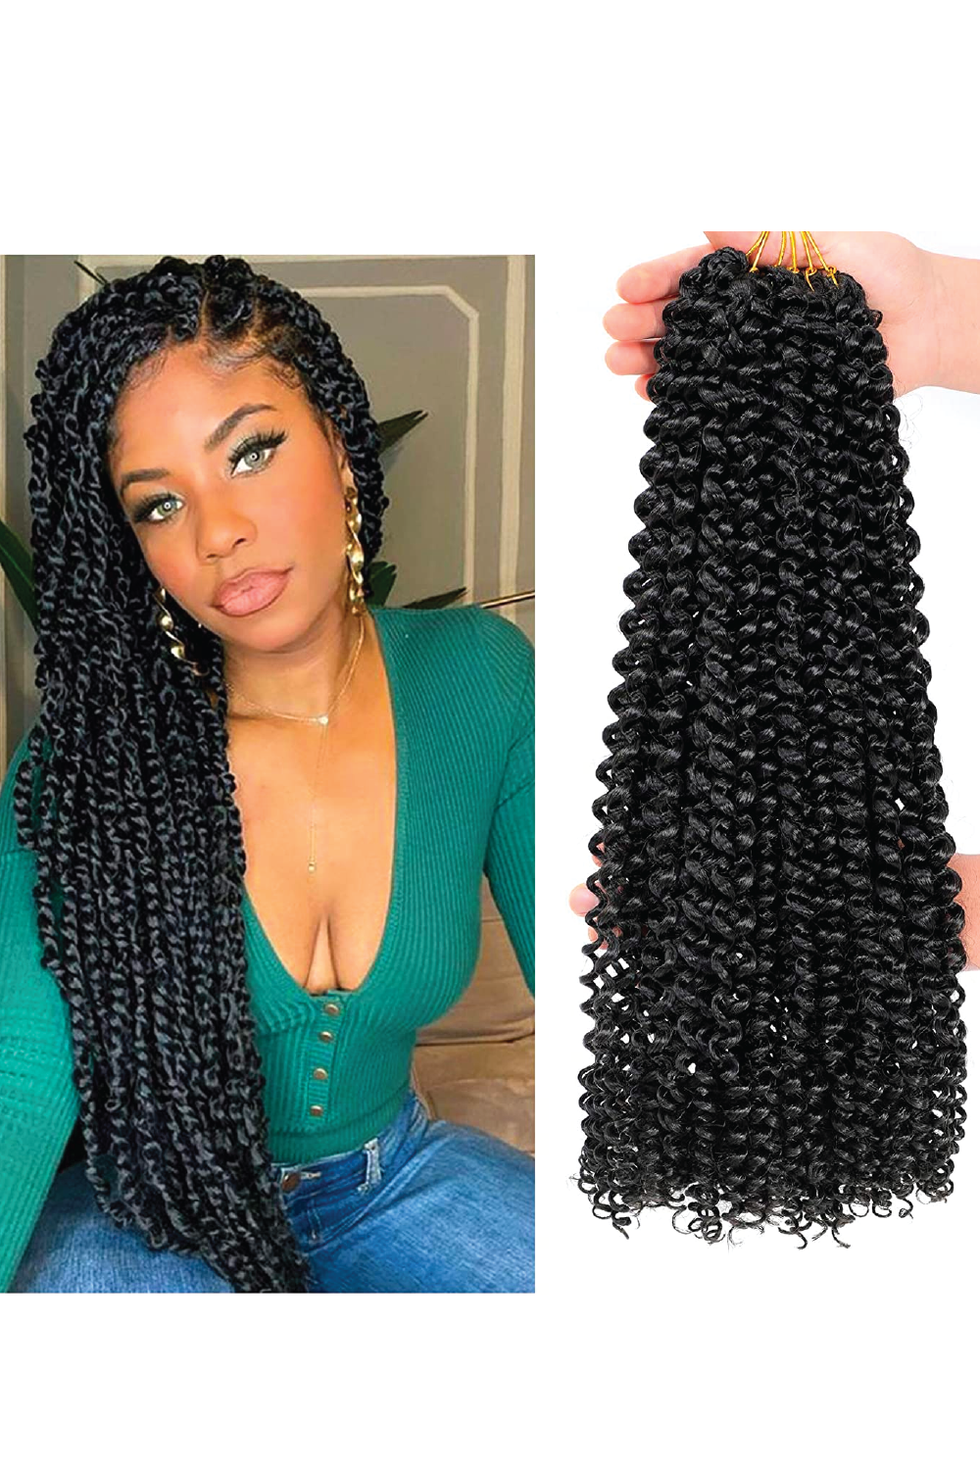 Befunny 8packs 16 Inch Pre Stretched Braiding Hair Short Black Crochet  Human Hair For Braids Or Twist Itchy Free Yaki Perm Straight Low  Temperature